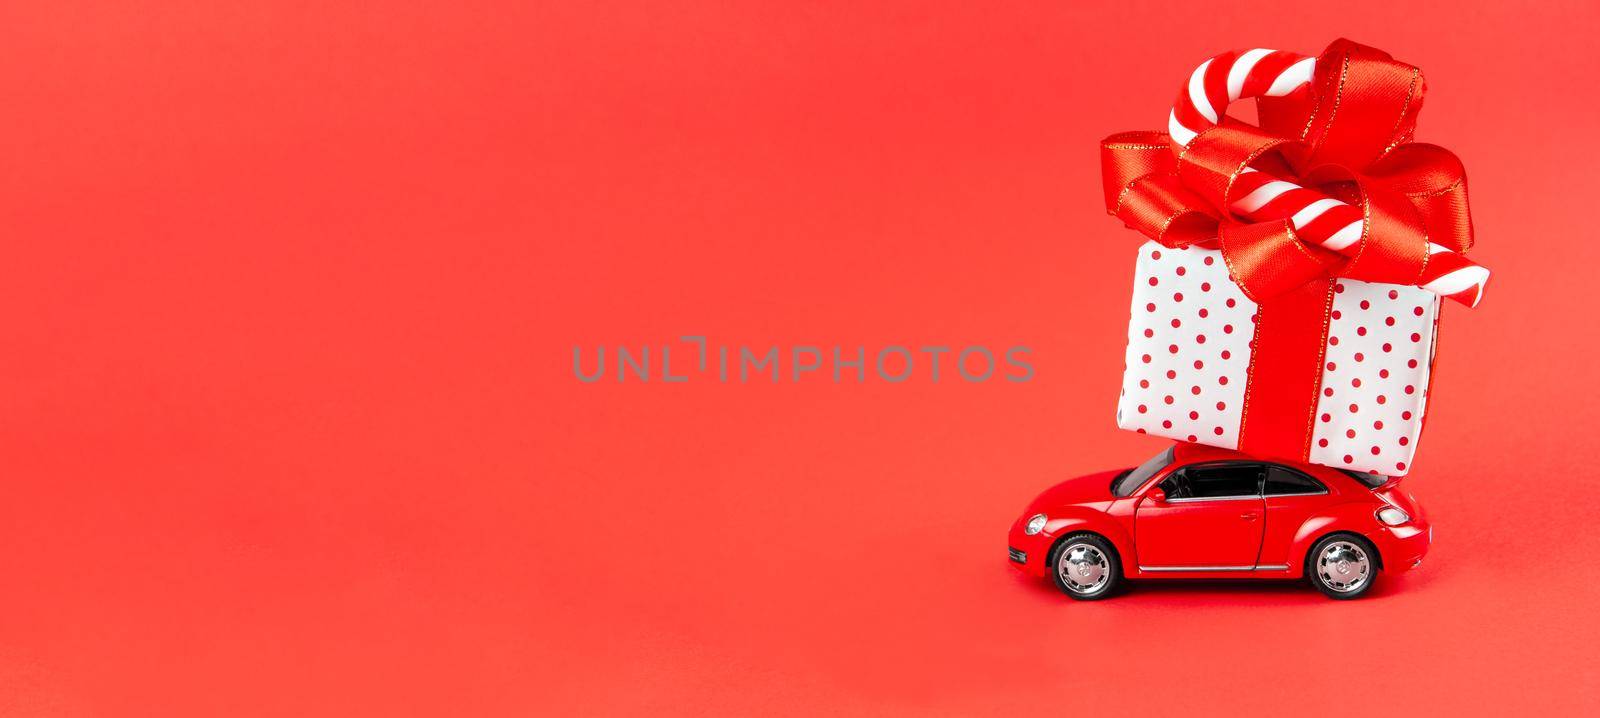 Moscow, Russia, January 14, 2021. Banner minimal design for celebrating christmas or new year greeting card. Gift delivery concept. Little red toy car with gift and candy on a red background